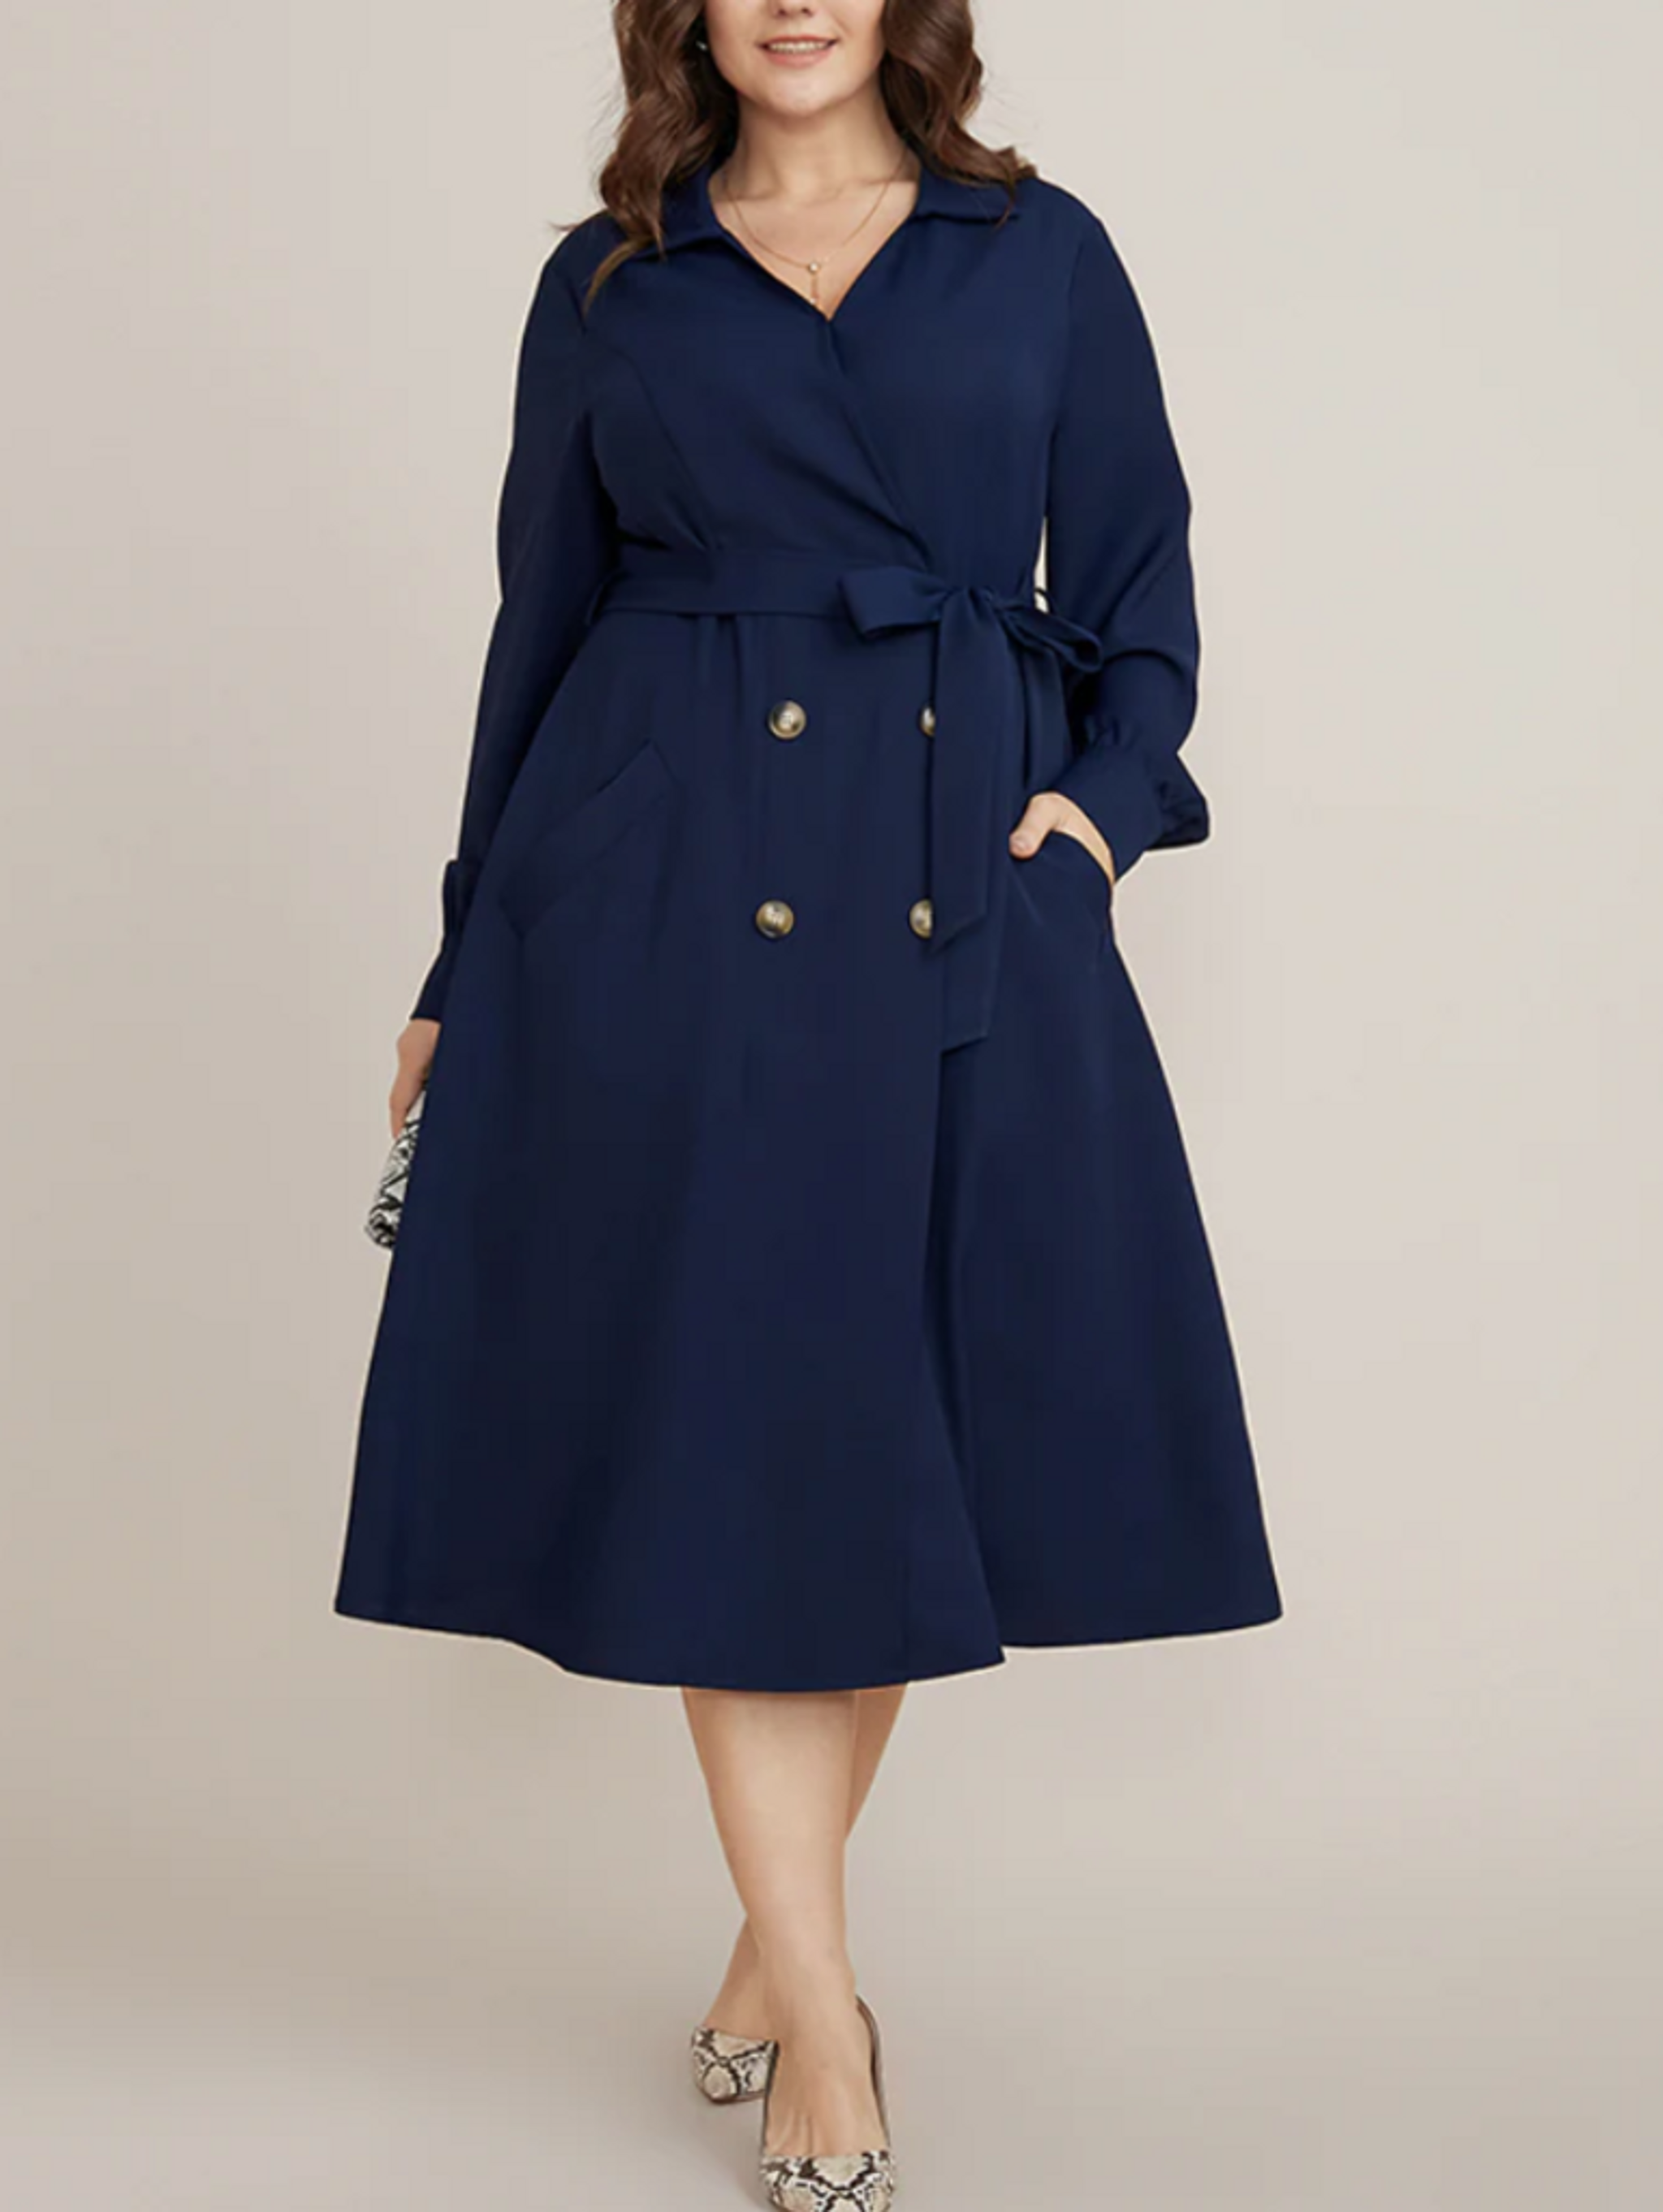 Plus size Chic Workwear Outfit in fall